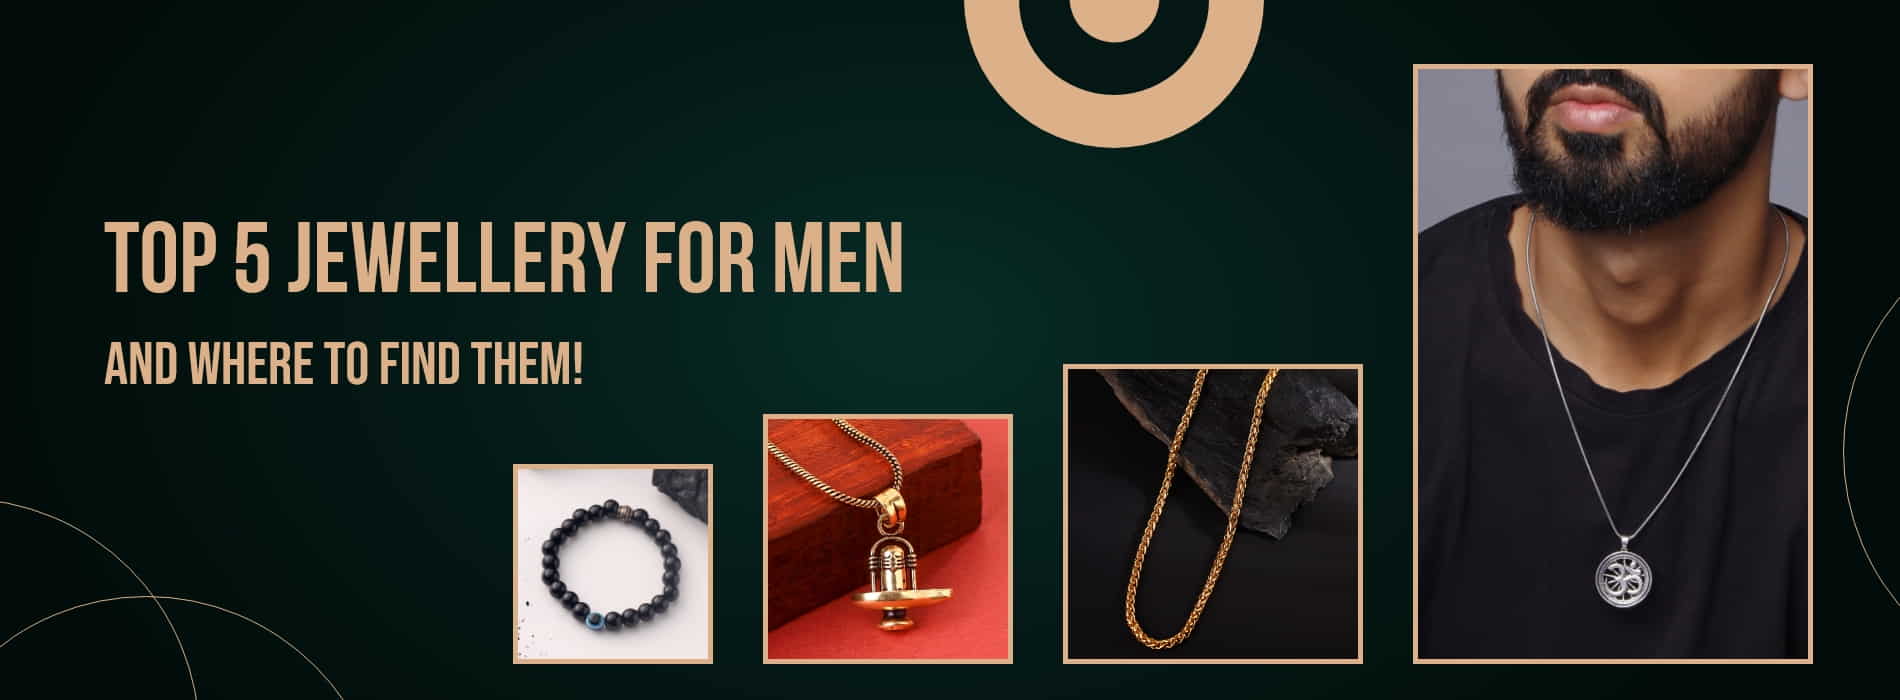 Top-5-Jewellery-for-Men-and-Where-to-Find-Them-Viraasi